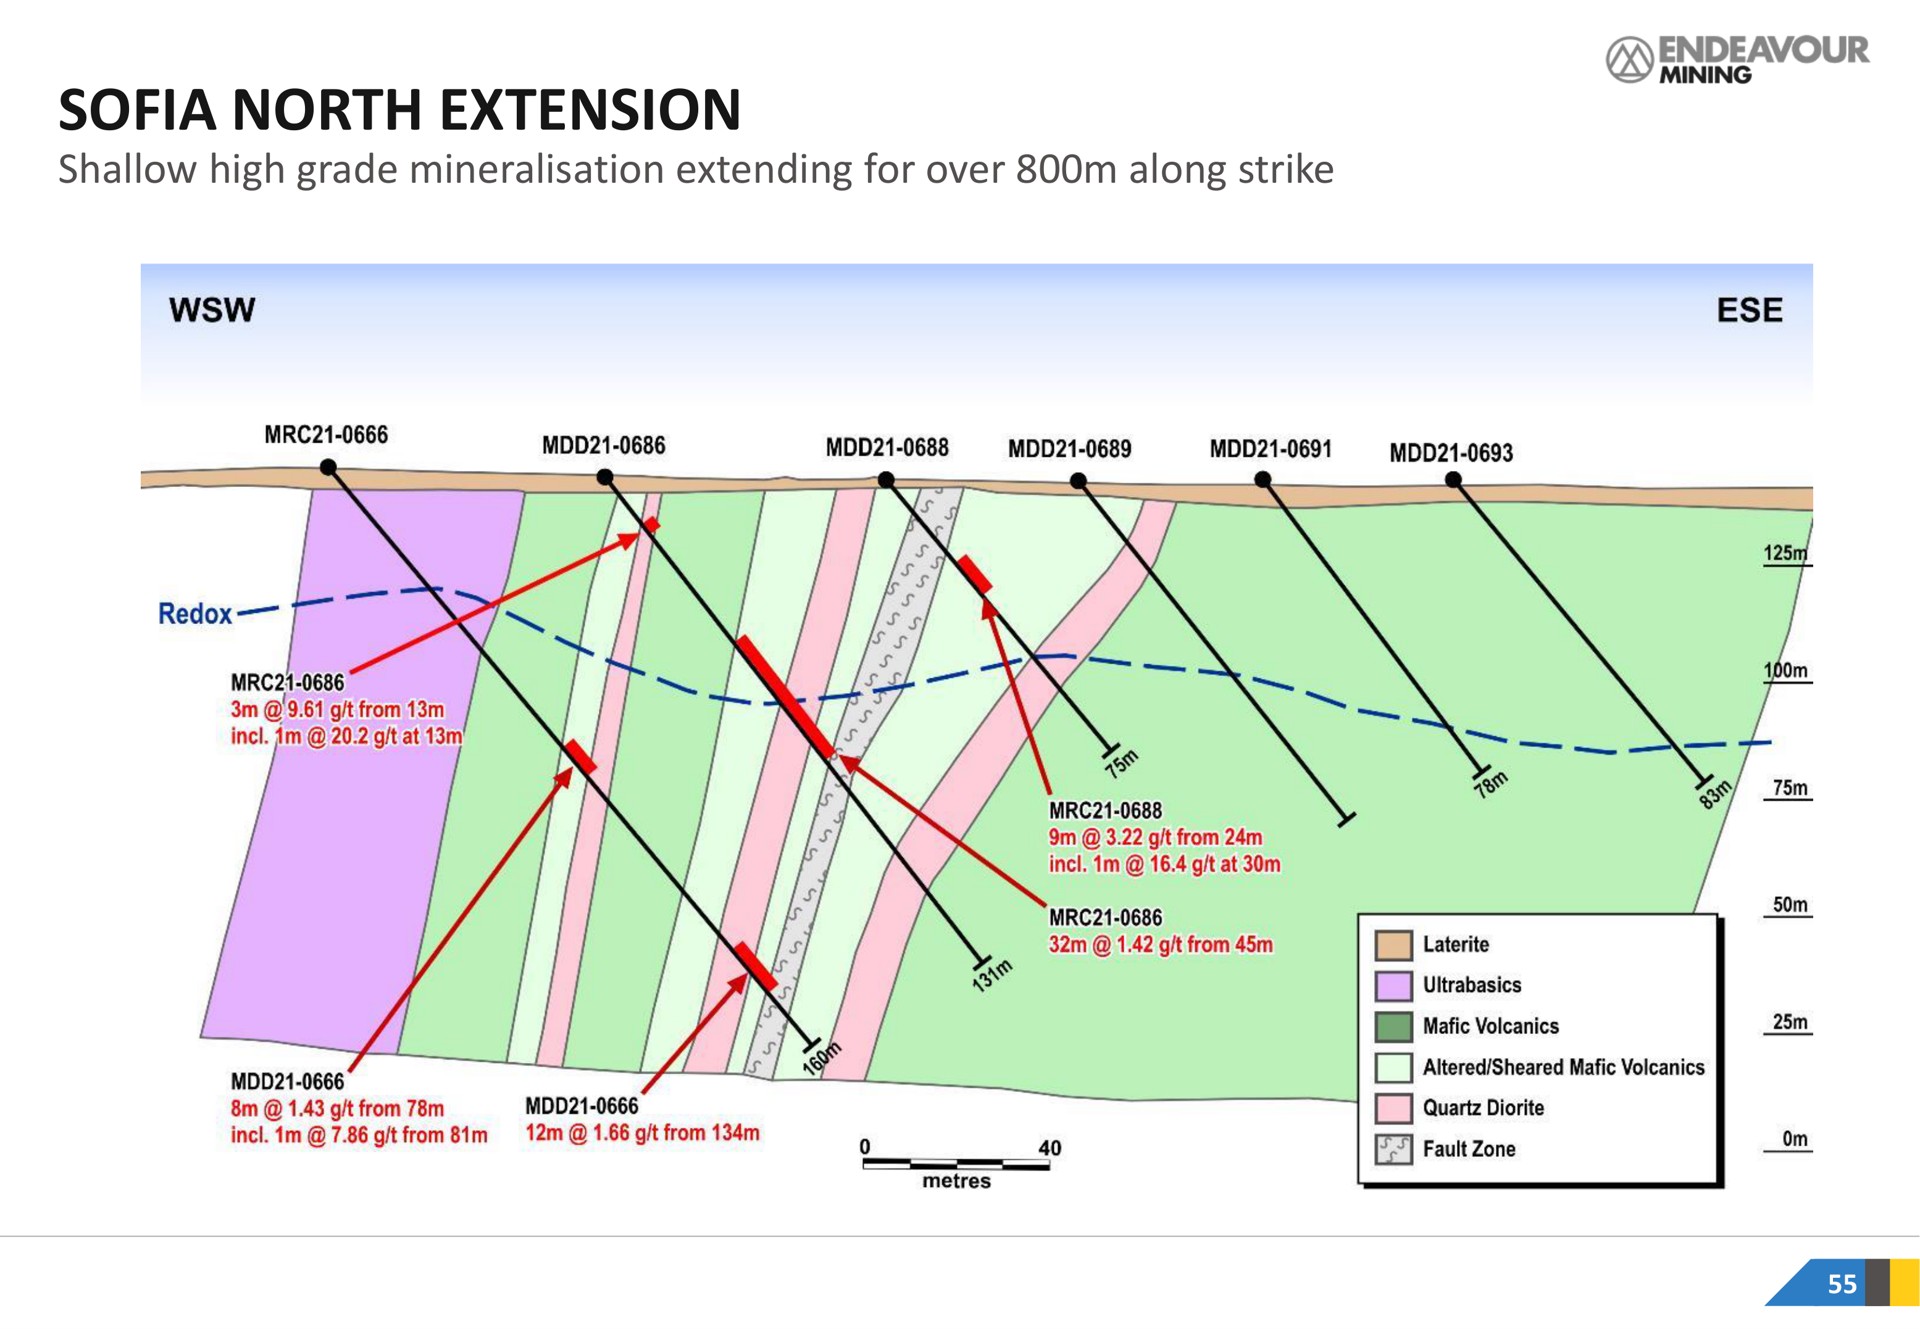 north extension shallow high grade extending for over along strike latter | Endeavour Mining